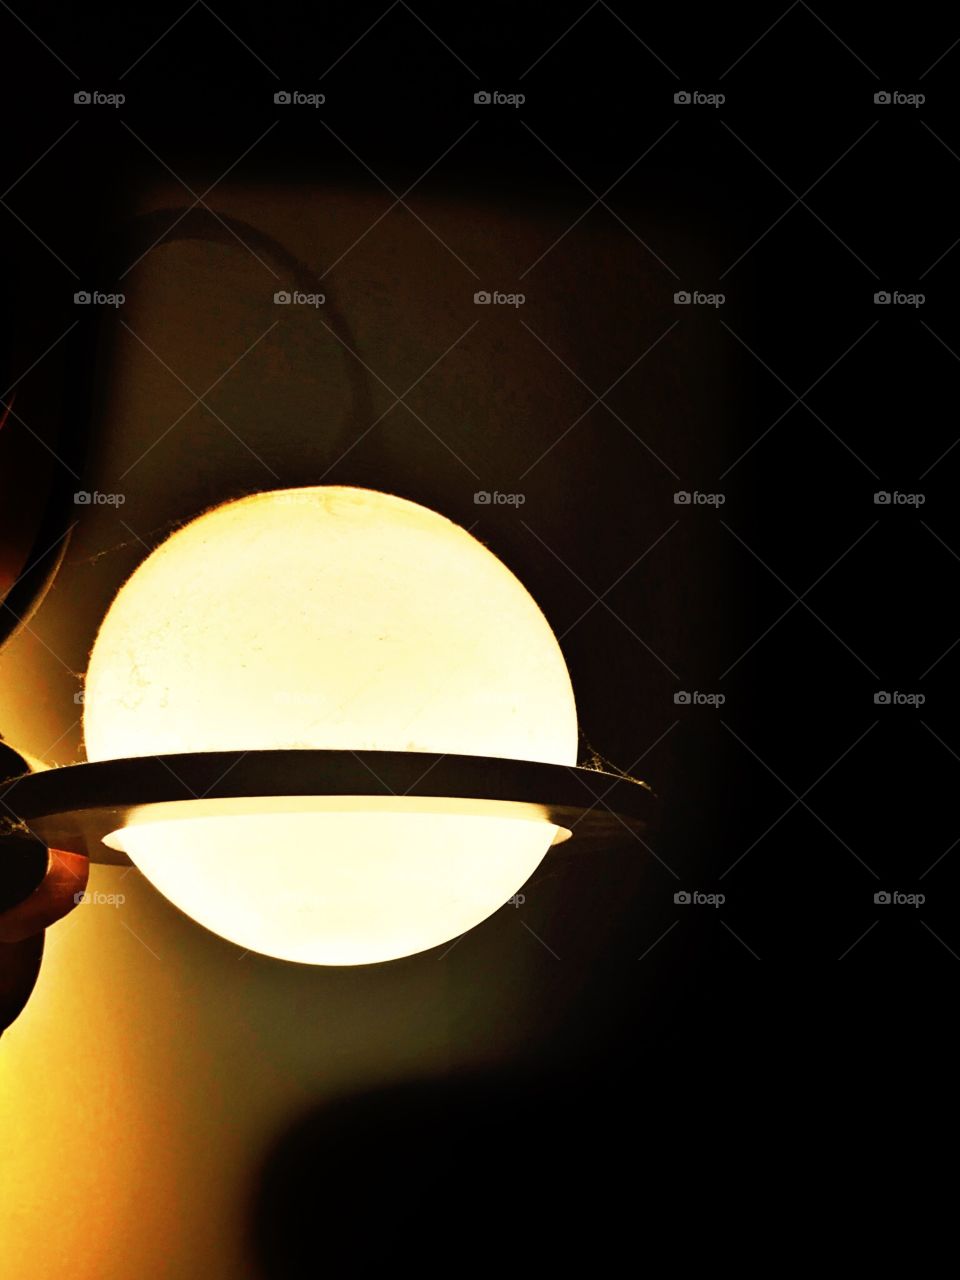 Night photography.

A hanging wall lamp ...